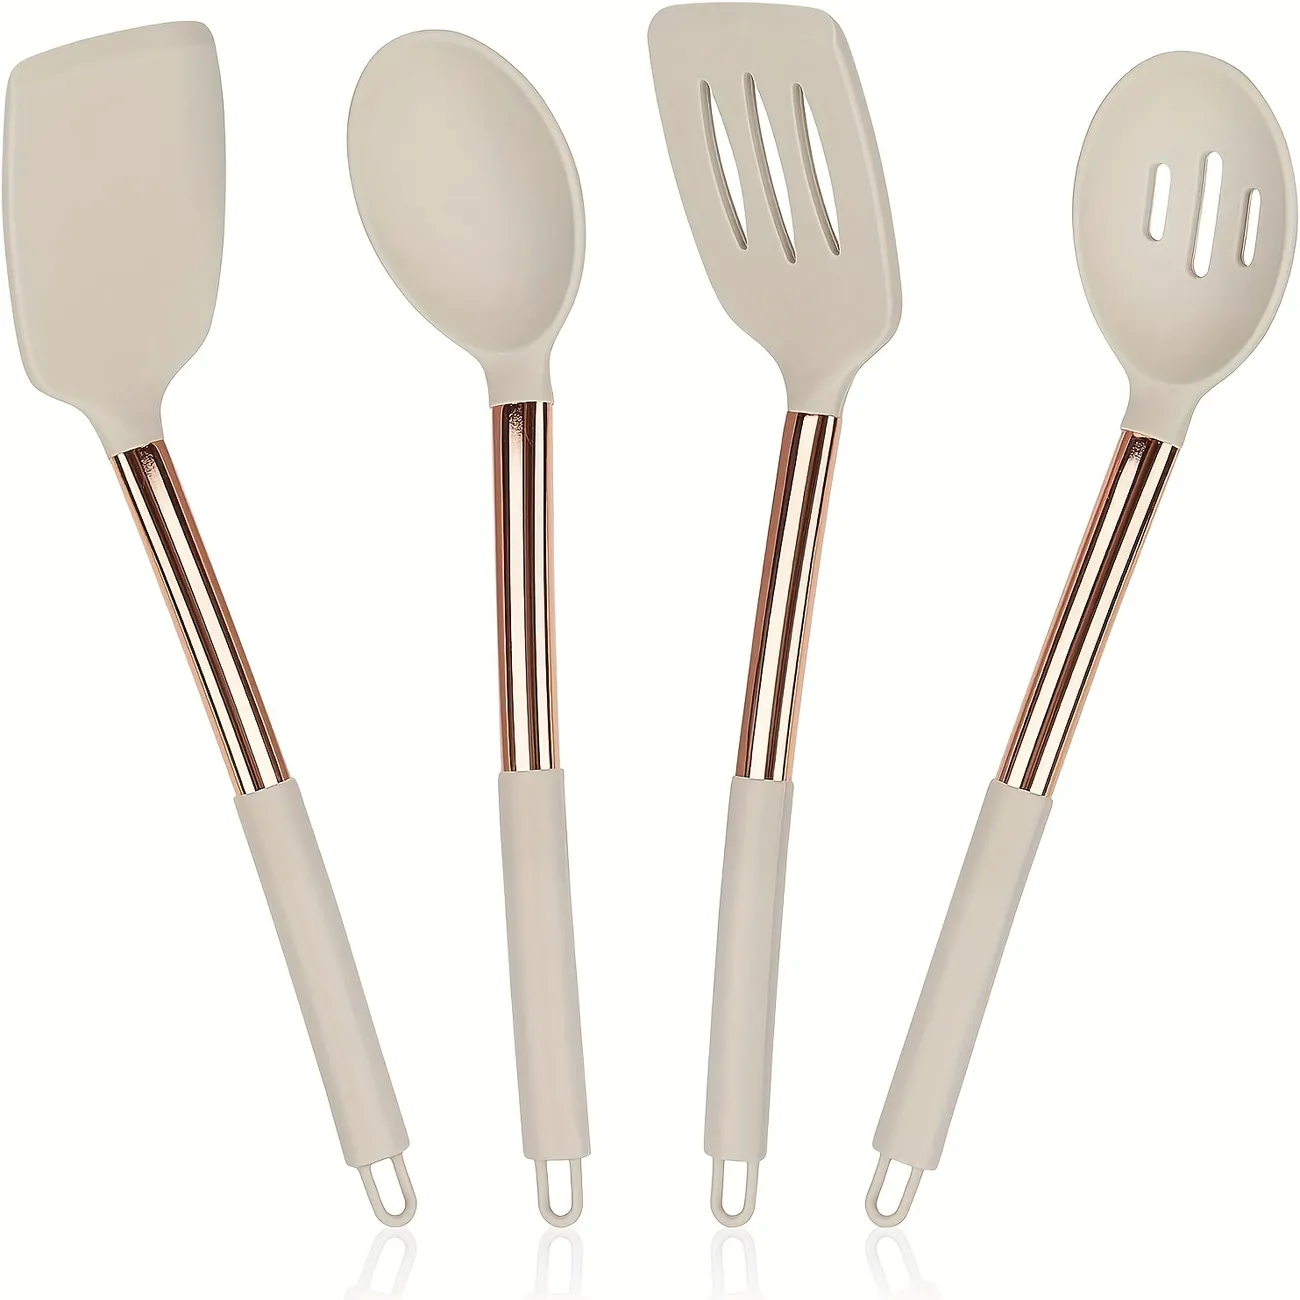 4pcs/set, Silicone Kitchen Utensils Set, Heat Resistant Khaki Cooking  Utensils Set, Non-stick Silicone Kitchen Spatula And Spoon, Cooking Turner  For F